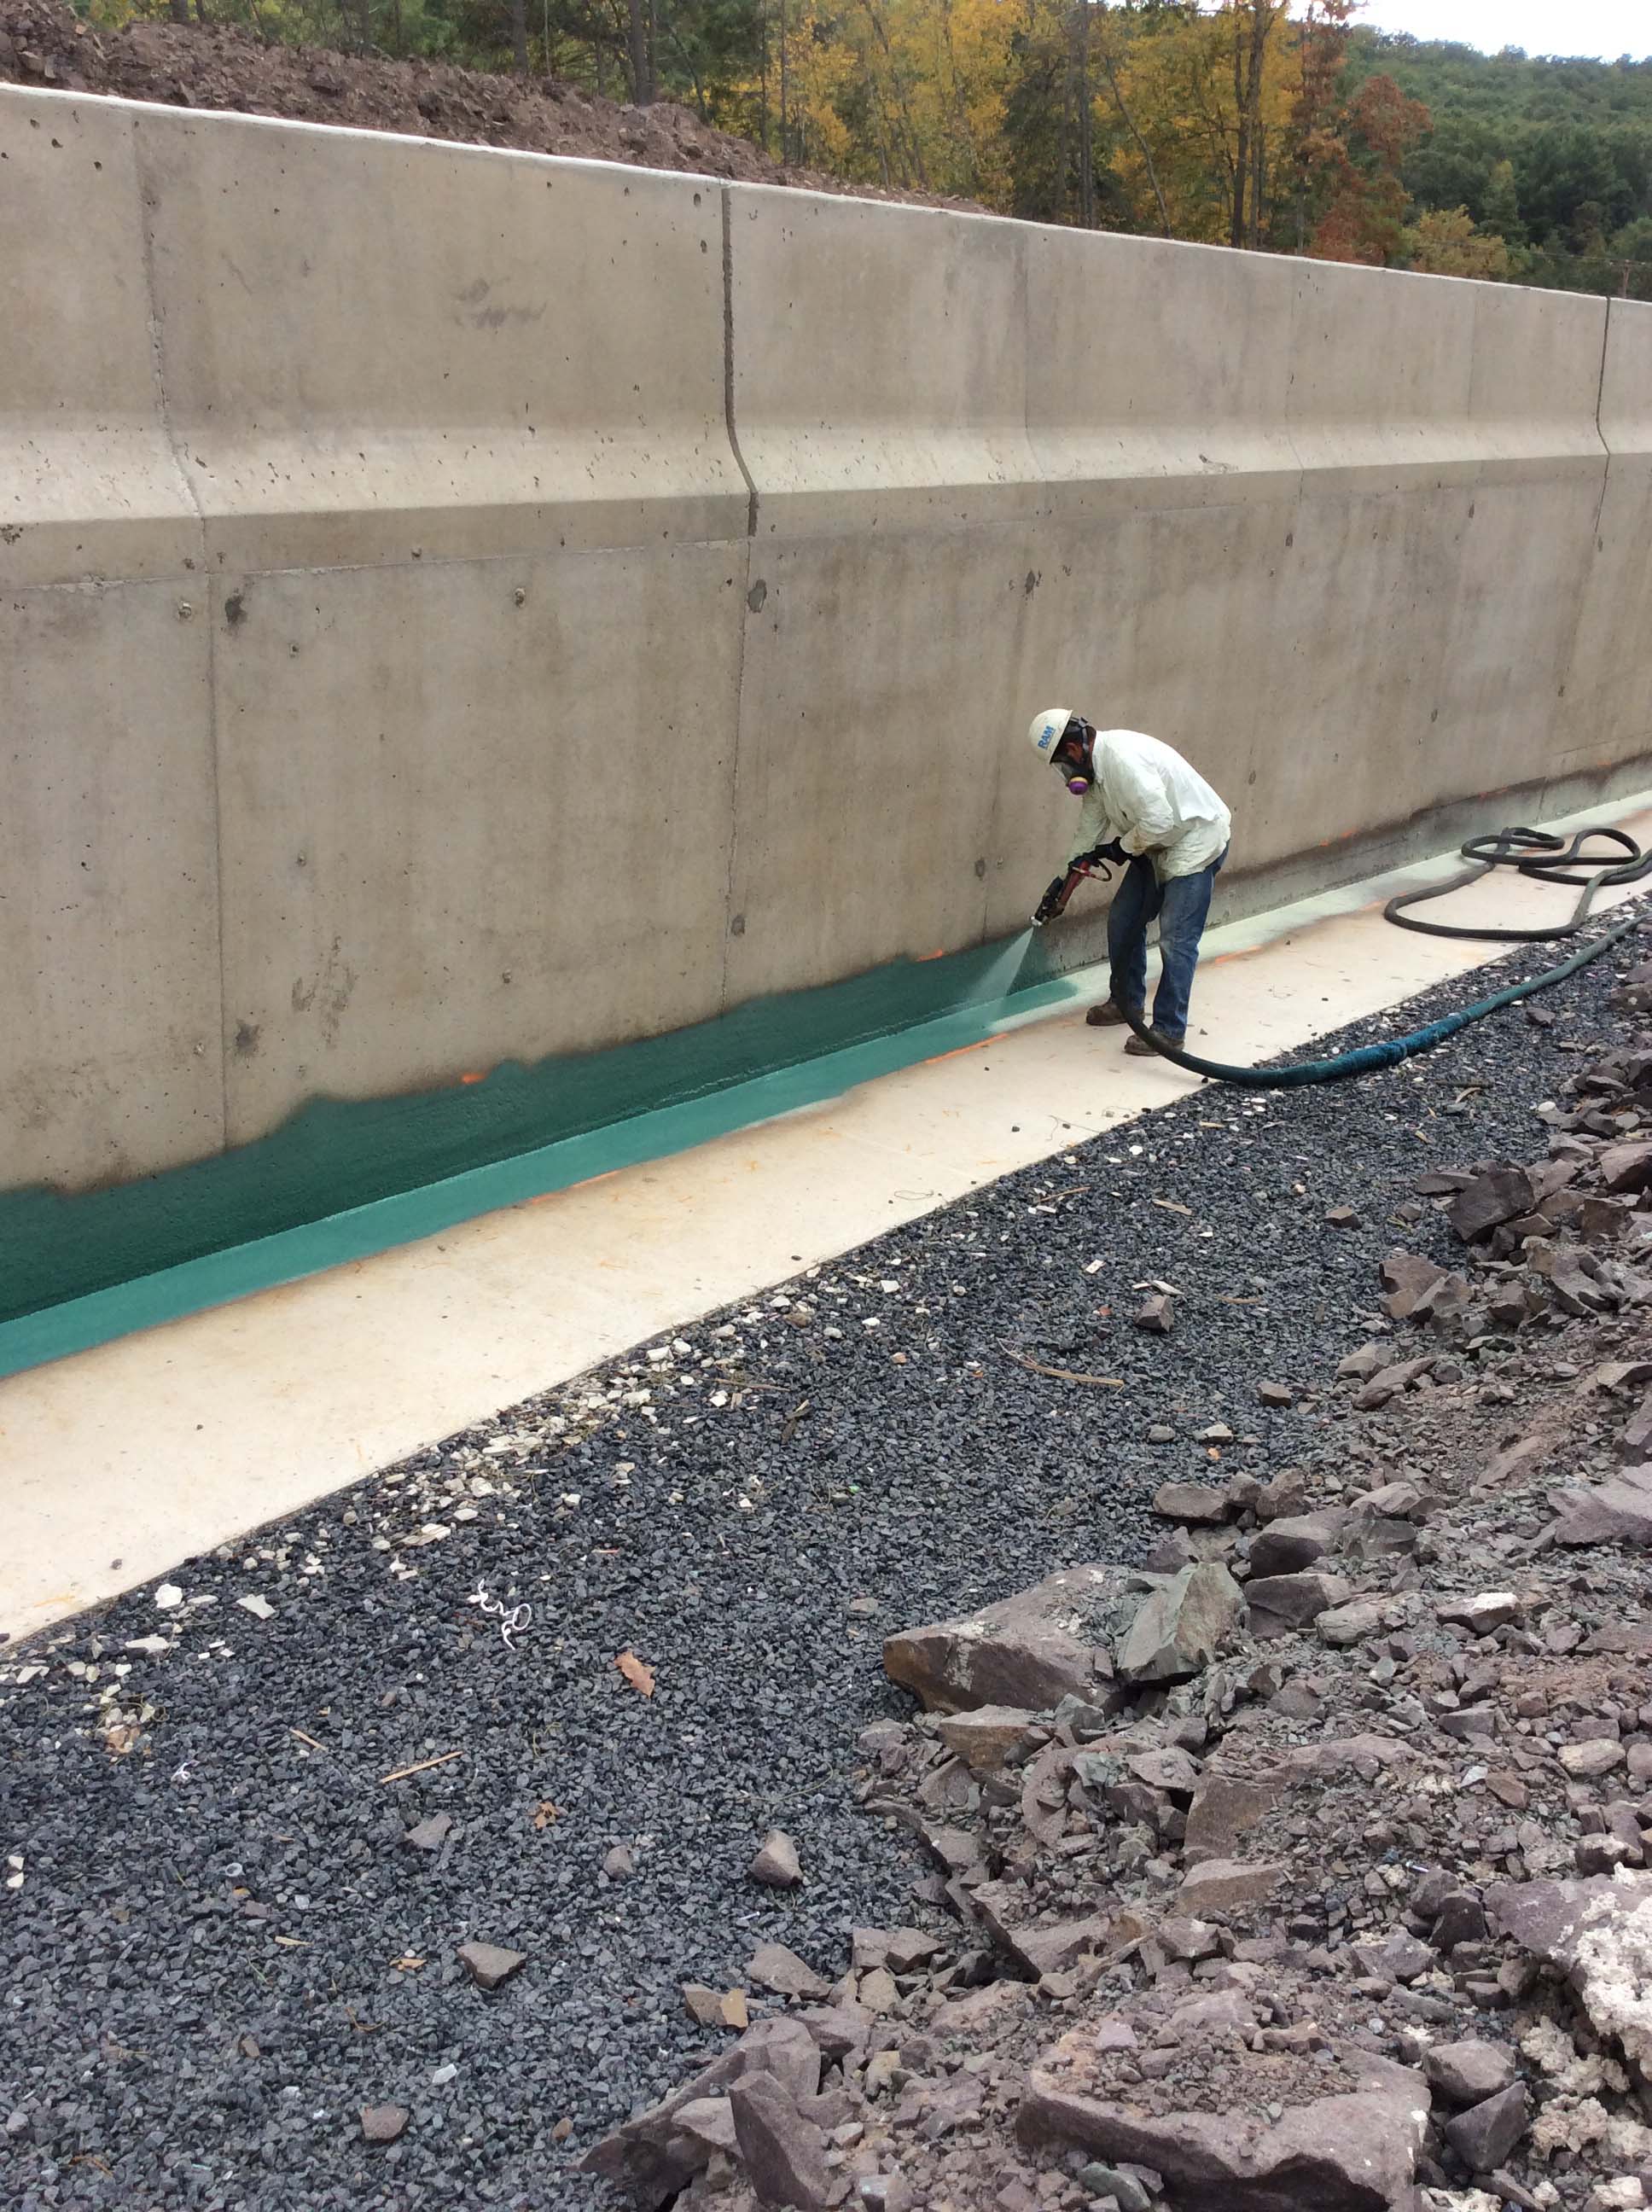 An image of a construction worker using a sprayer to apply a green coating to a bridge.